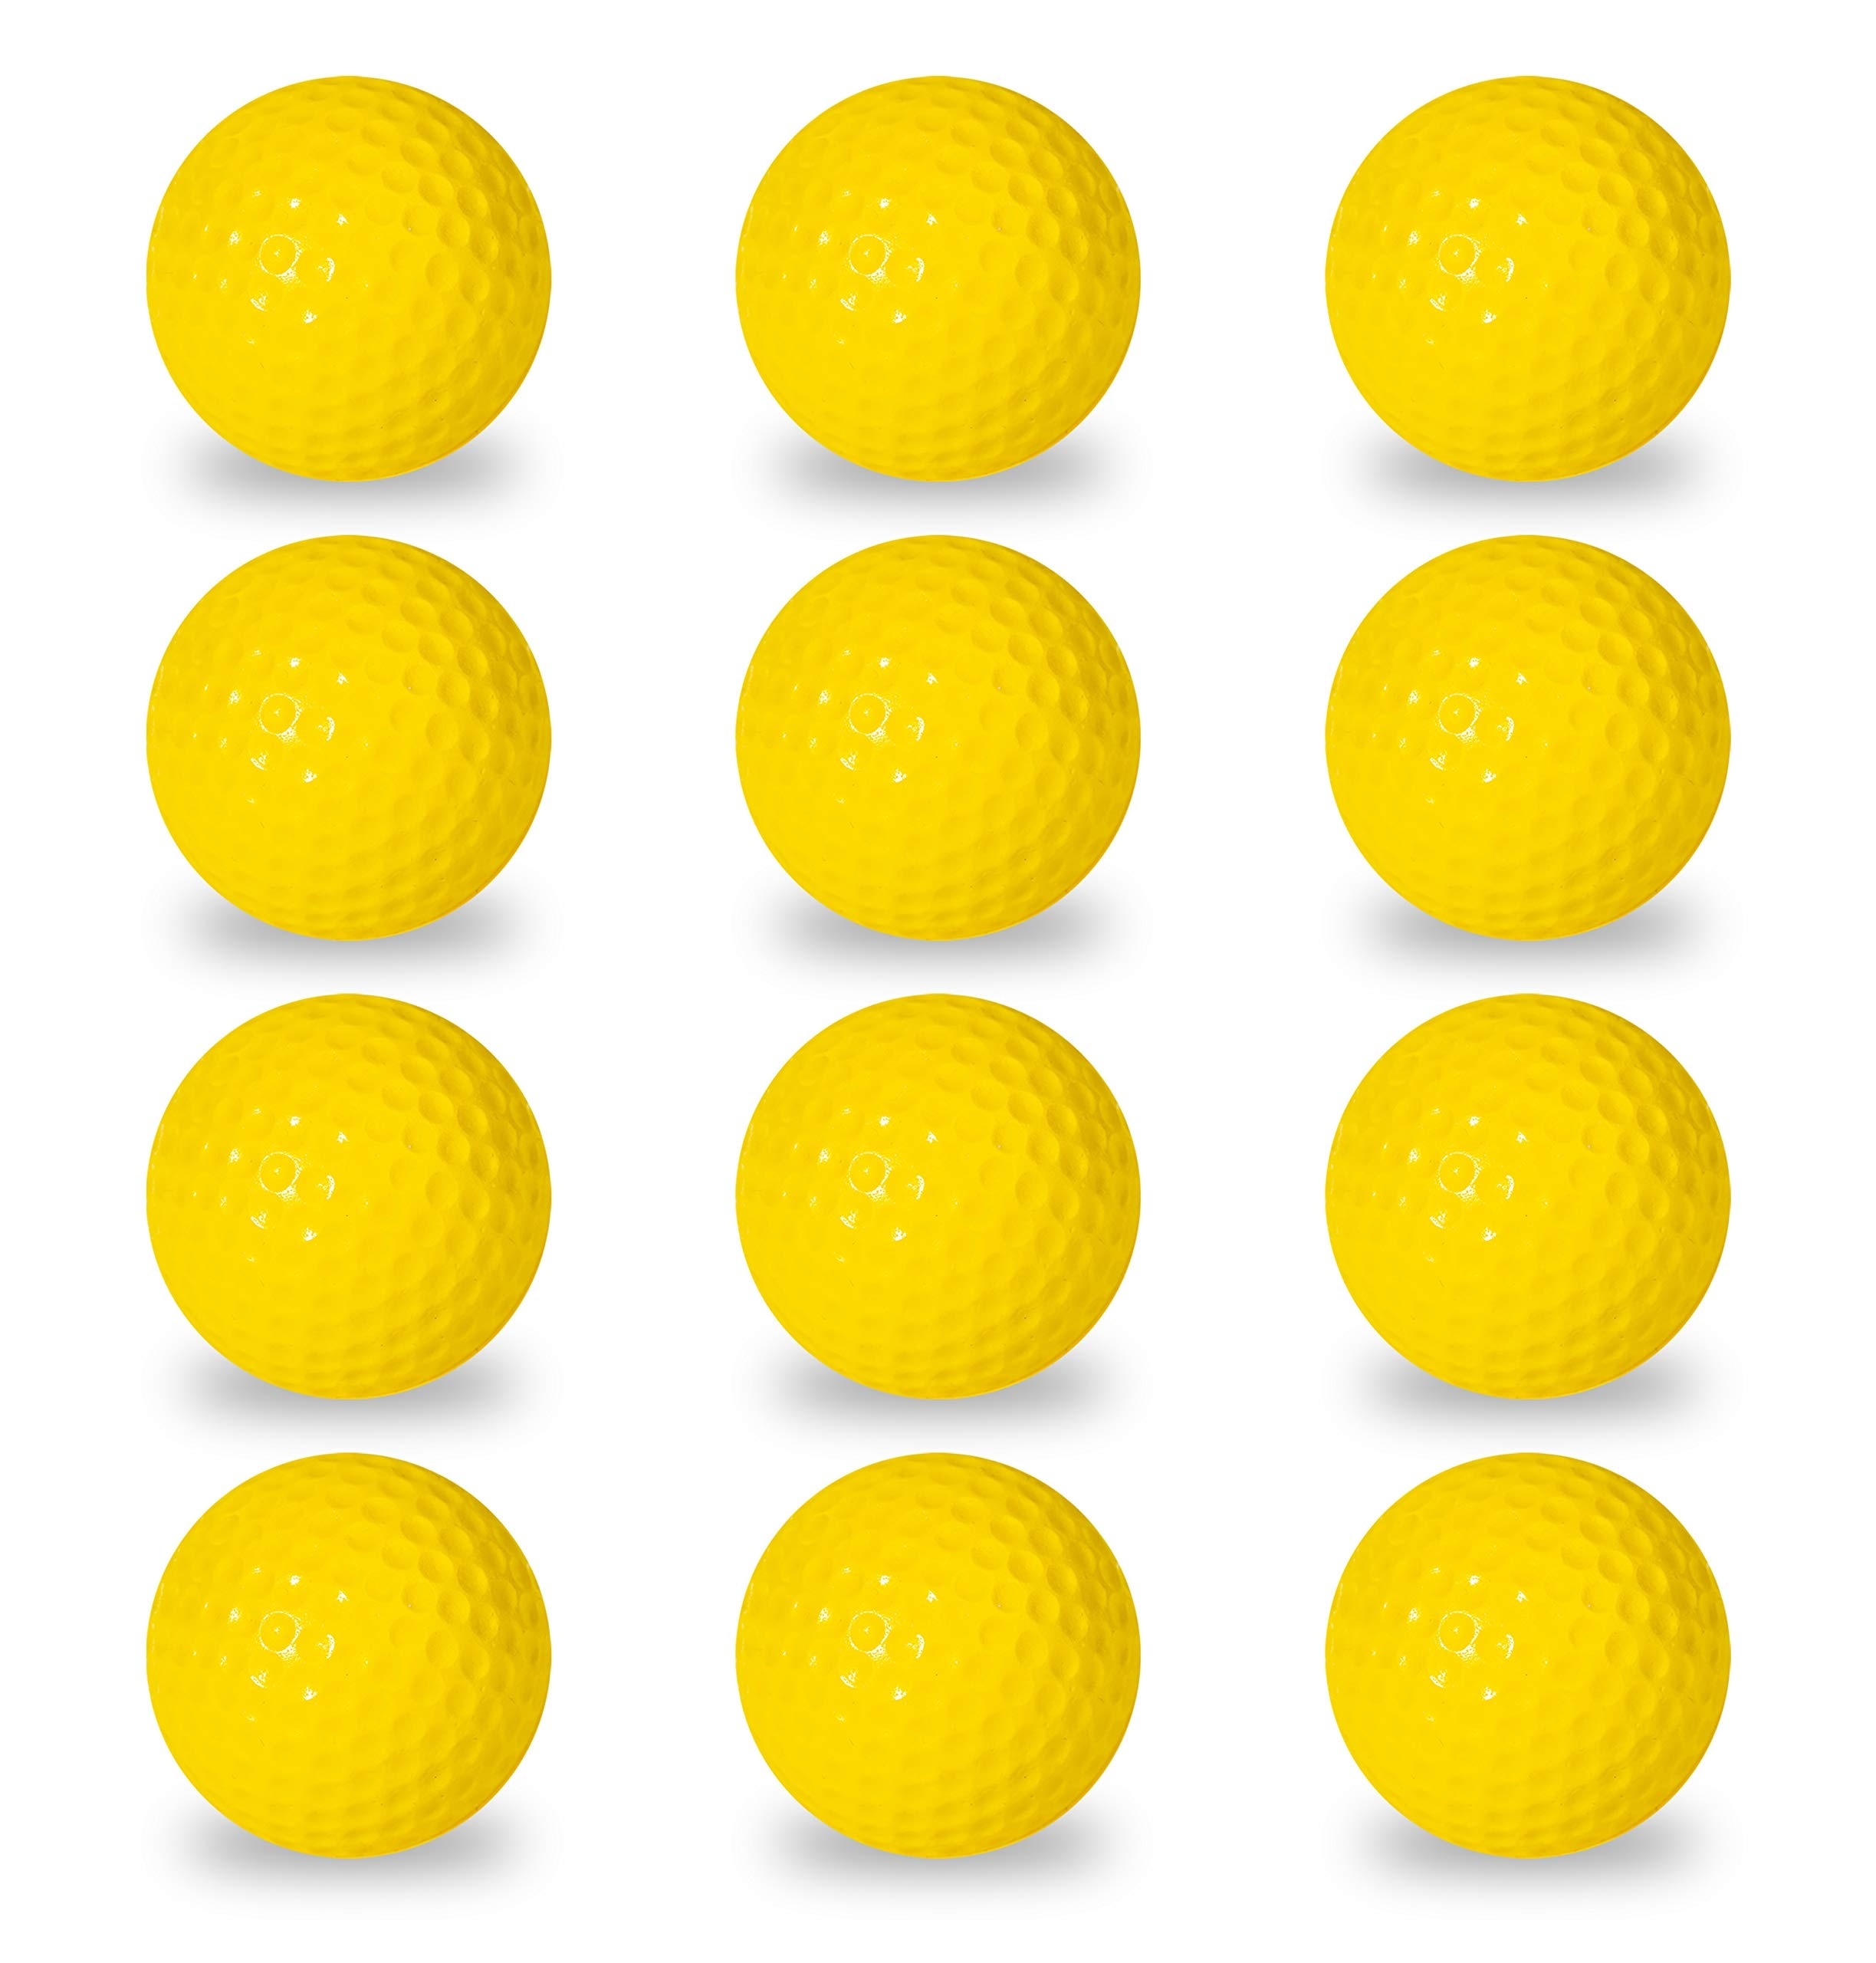 extra large capacity commercial plastic golf ball tray with 16 foam golf balls excellent durability and stability golf tray perfect for indoor and outdoor training details 8